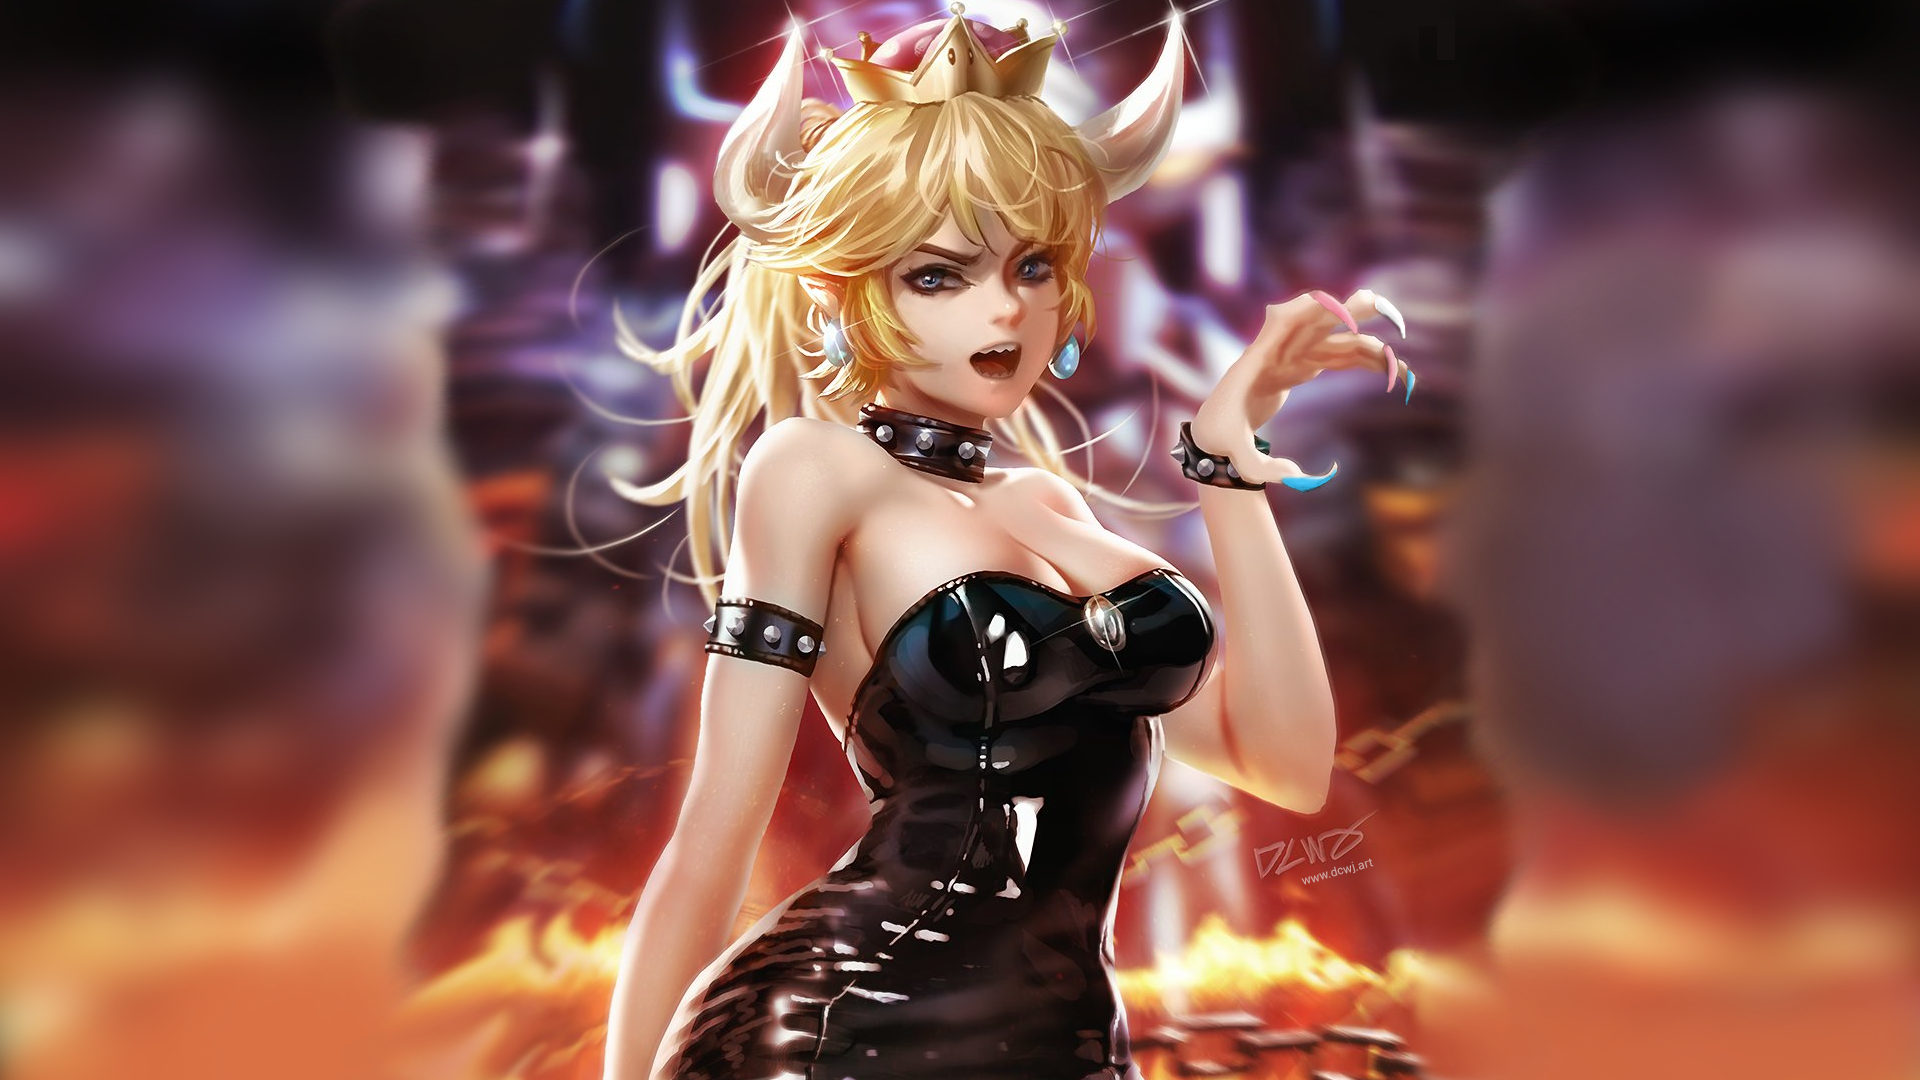 Bowsette Anime Picture In Picture Blonde Leather Clothing 1920x1080